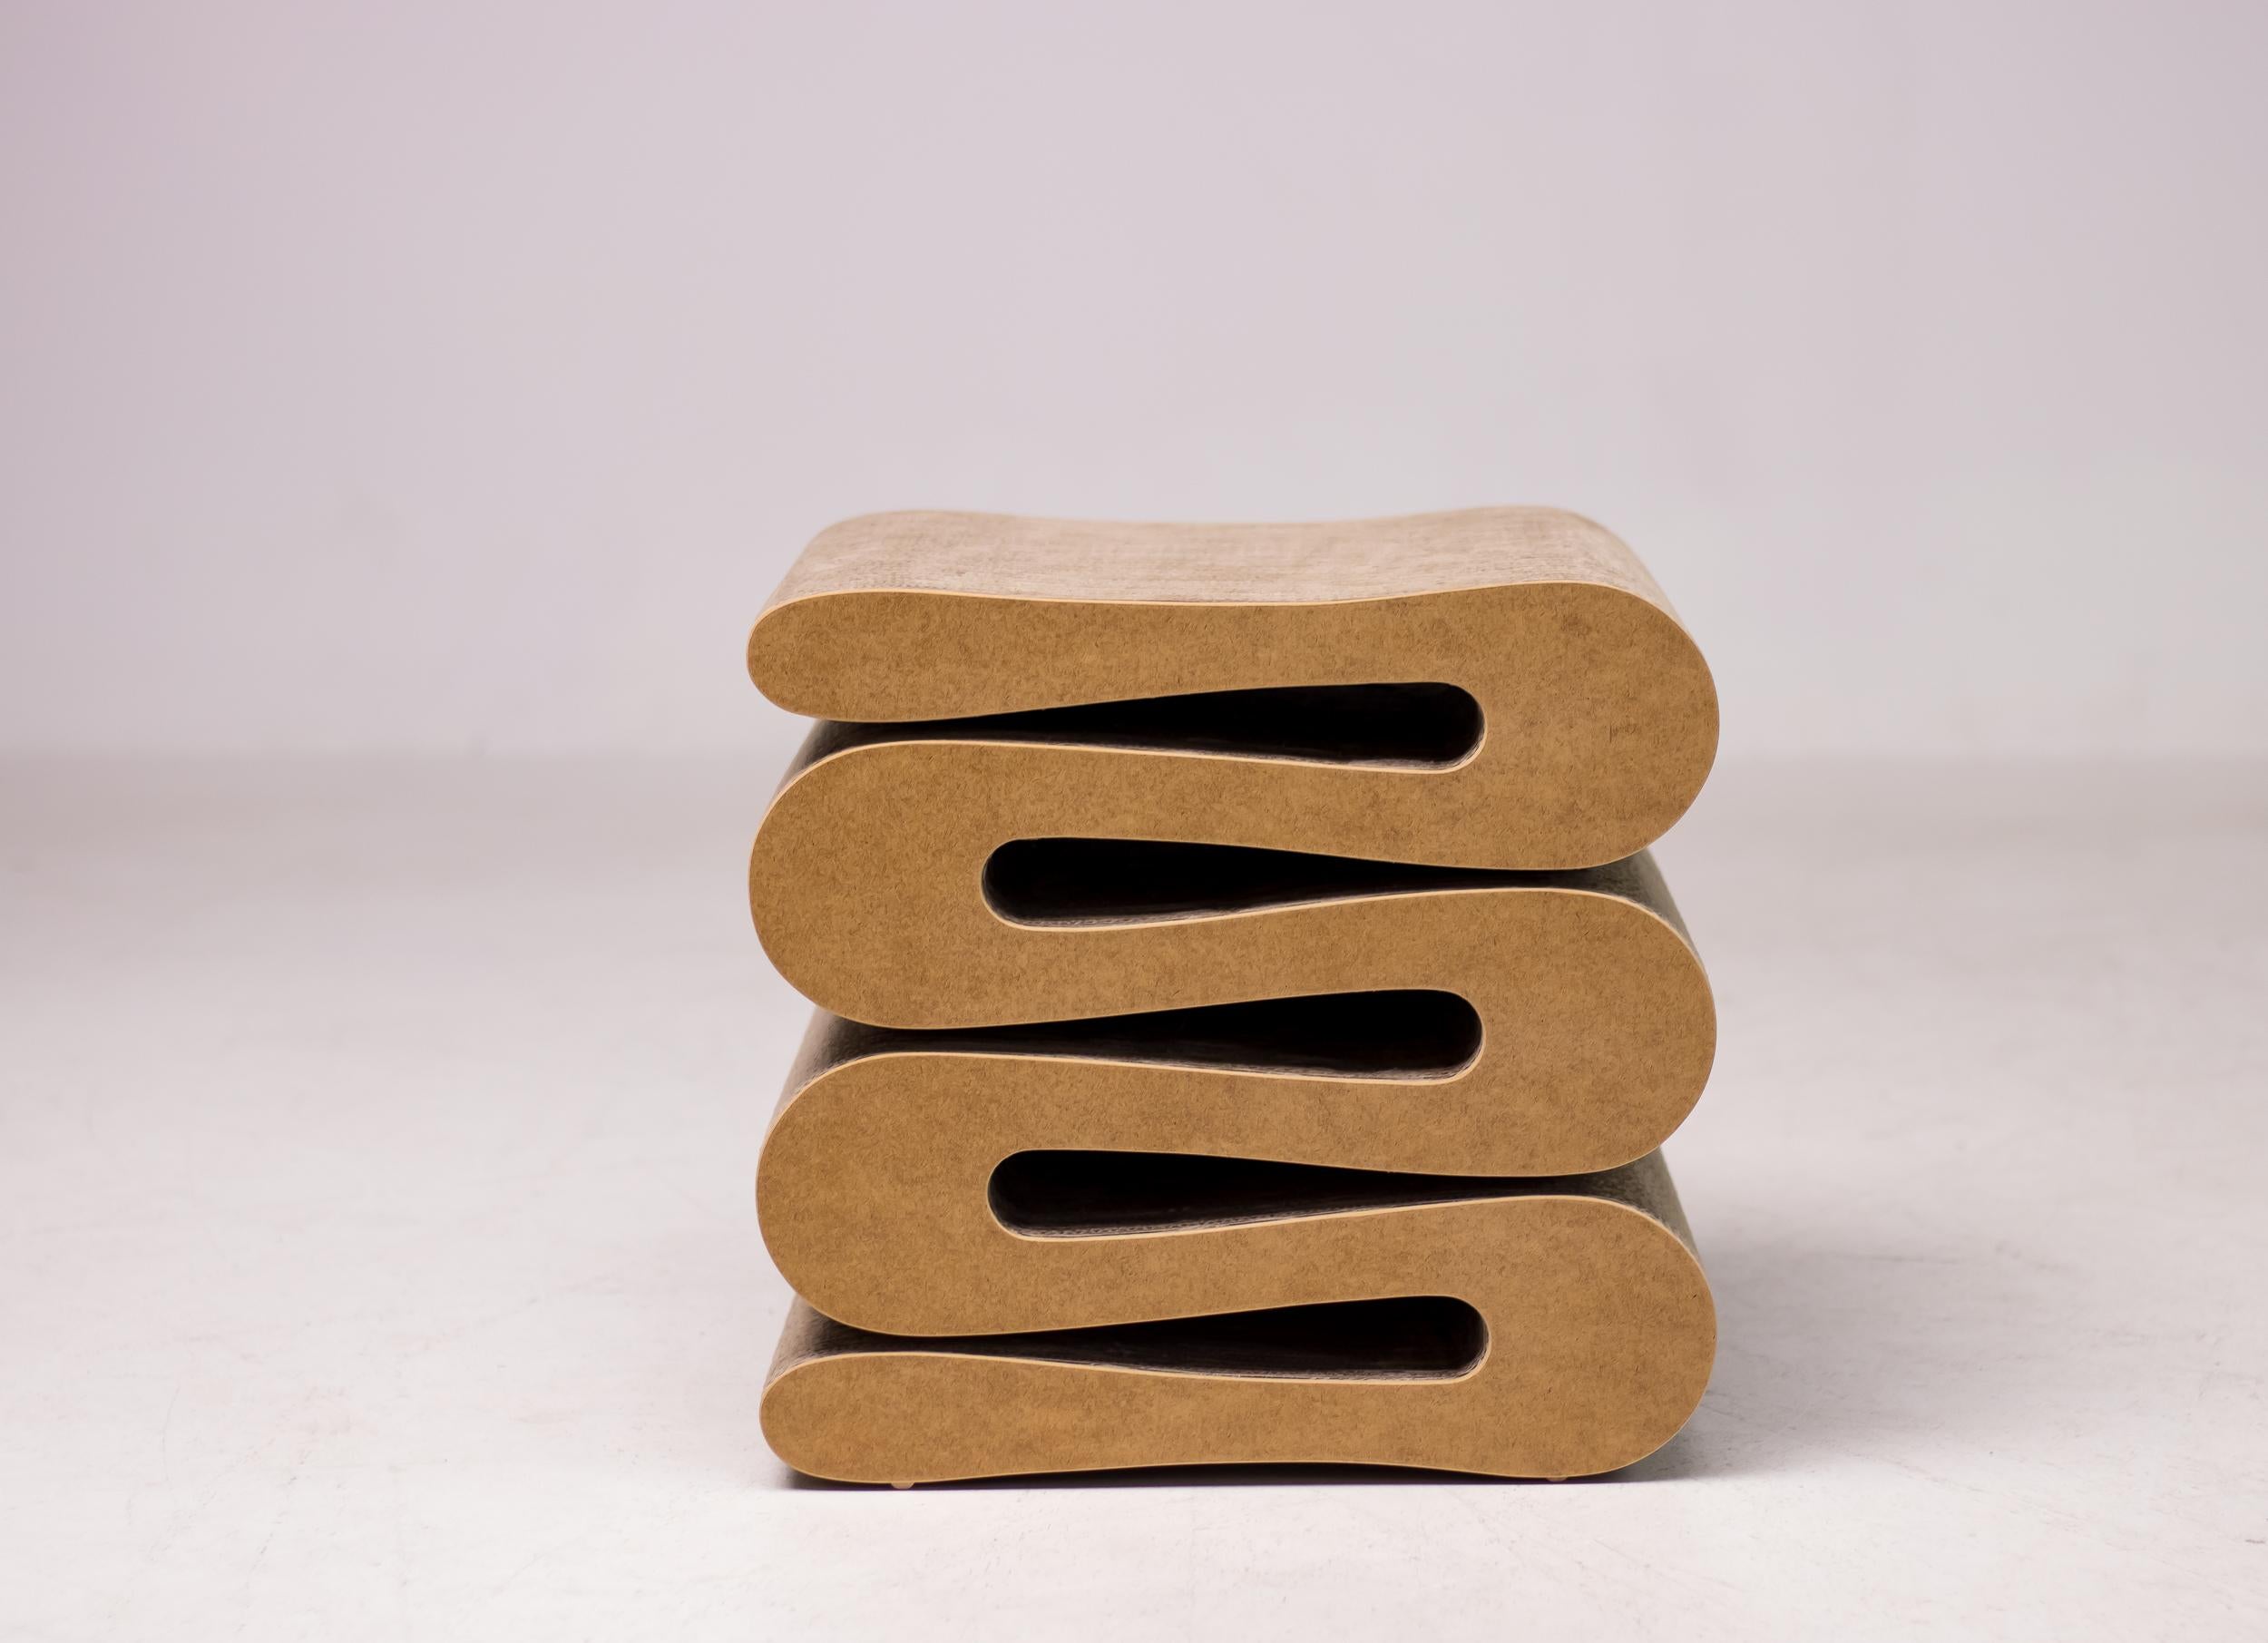 Frank Gehry Wiggle stool. Made of corrugated cardboard and hardboard to the edges.
Labeled underneath, excellent condition.

Frank Gehry is considered one of the most influential architects of the late 20th century. During the early period of his